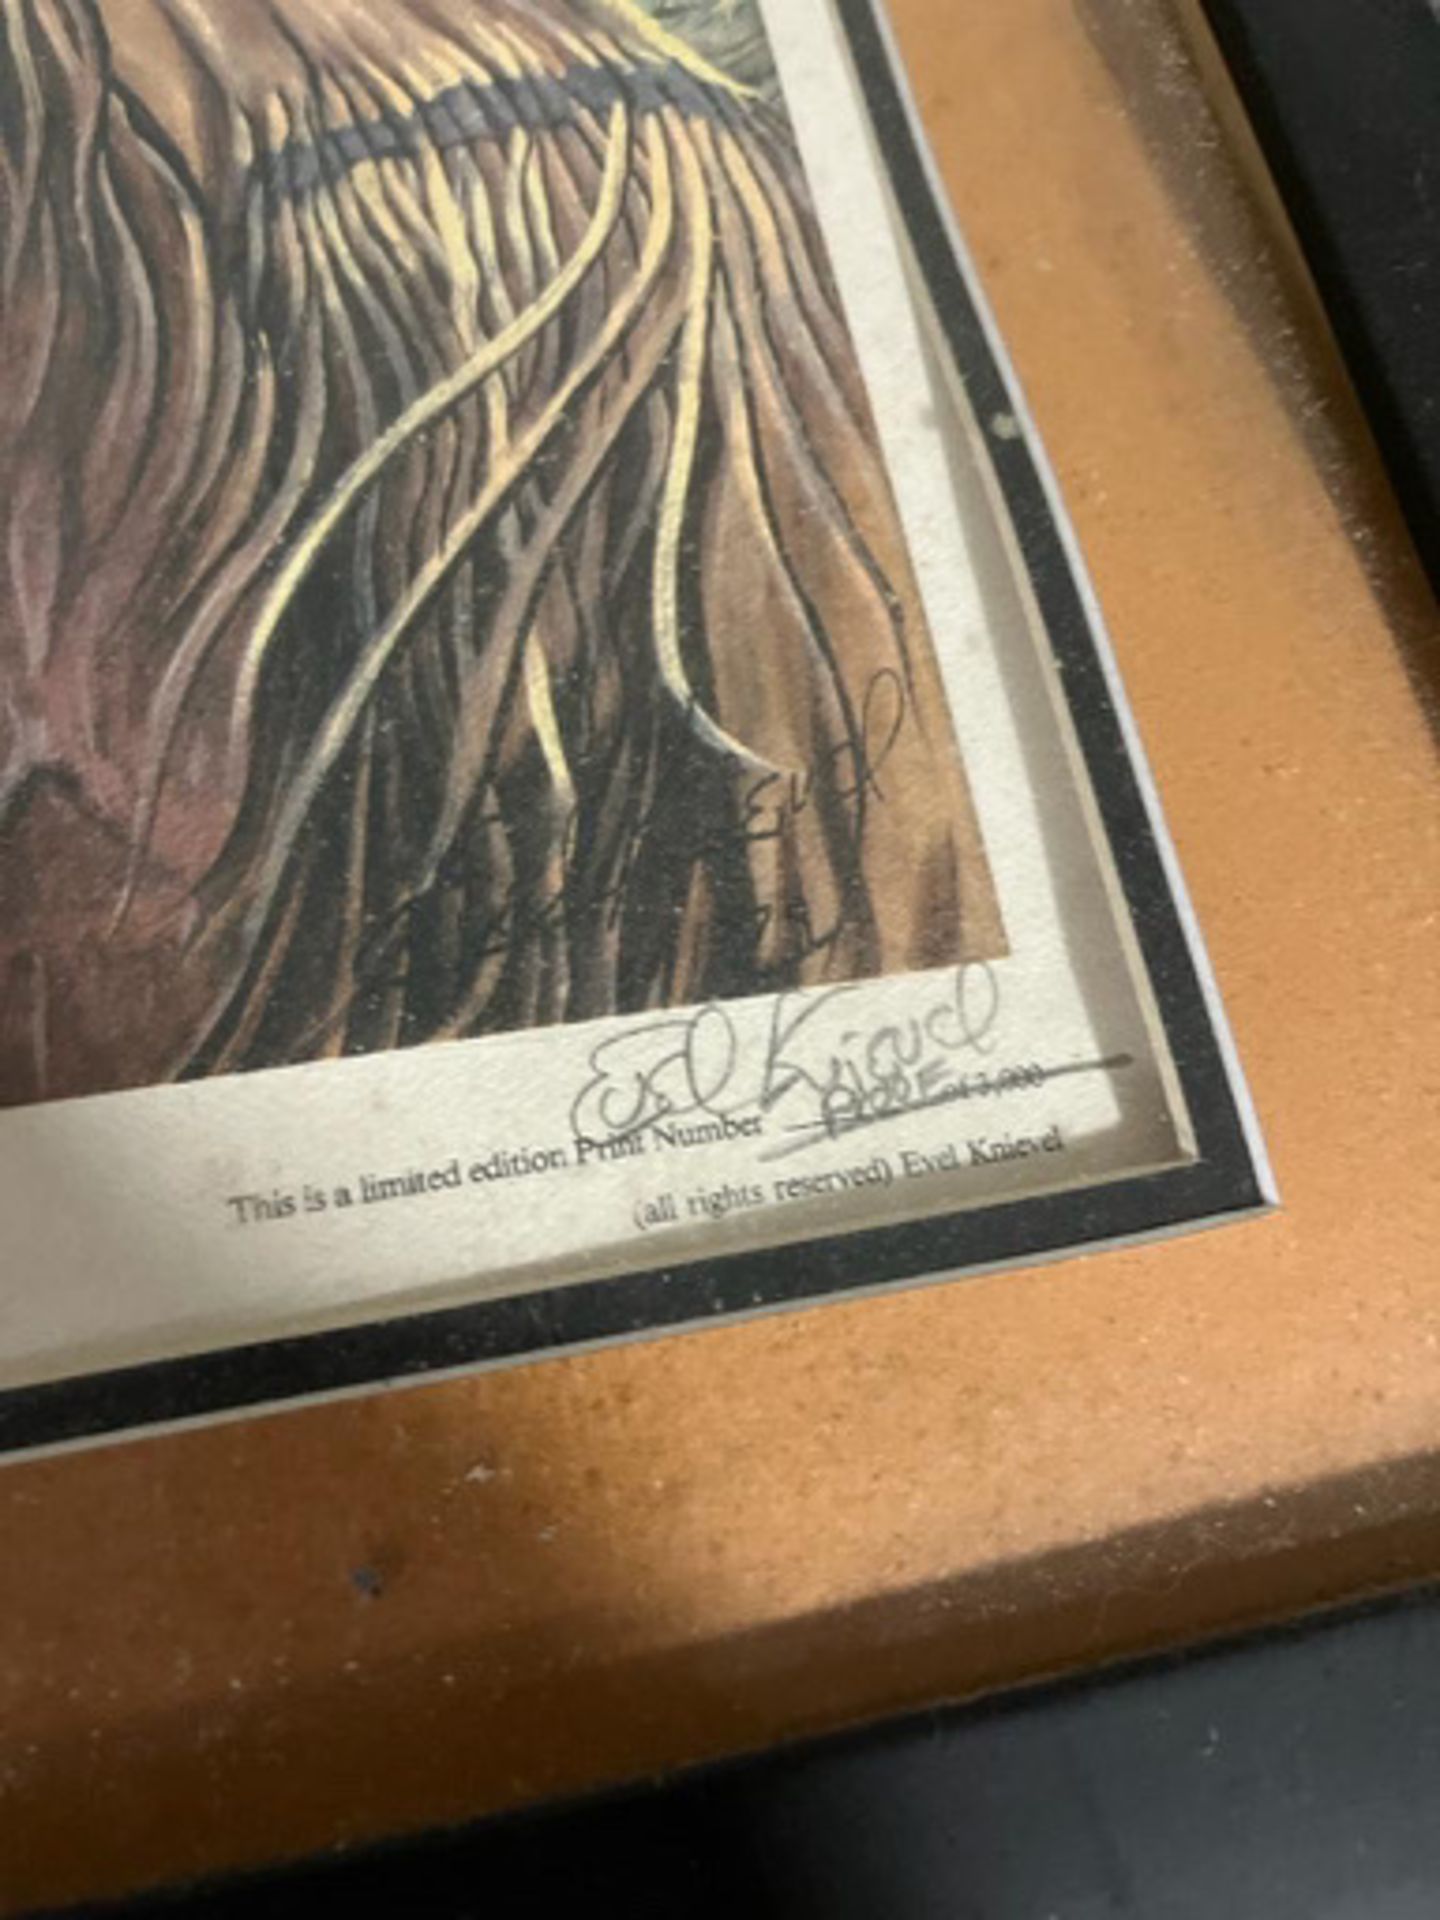 EVEL KNIEVEL ARTIST PROOF SIGNED TWICE BY EVEL TO HIS ACCOUNTANT - Image 5 of 6